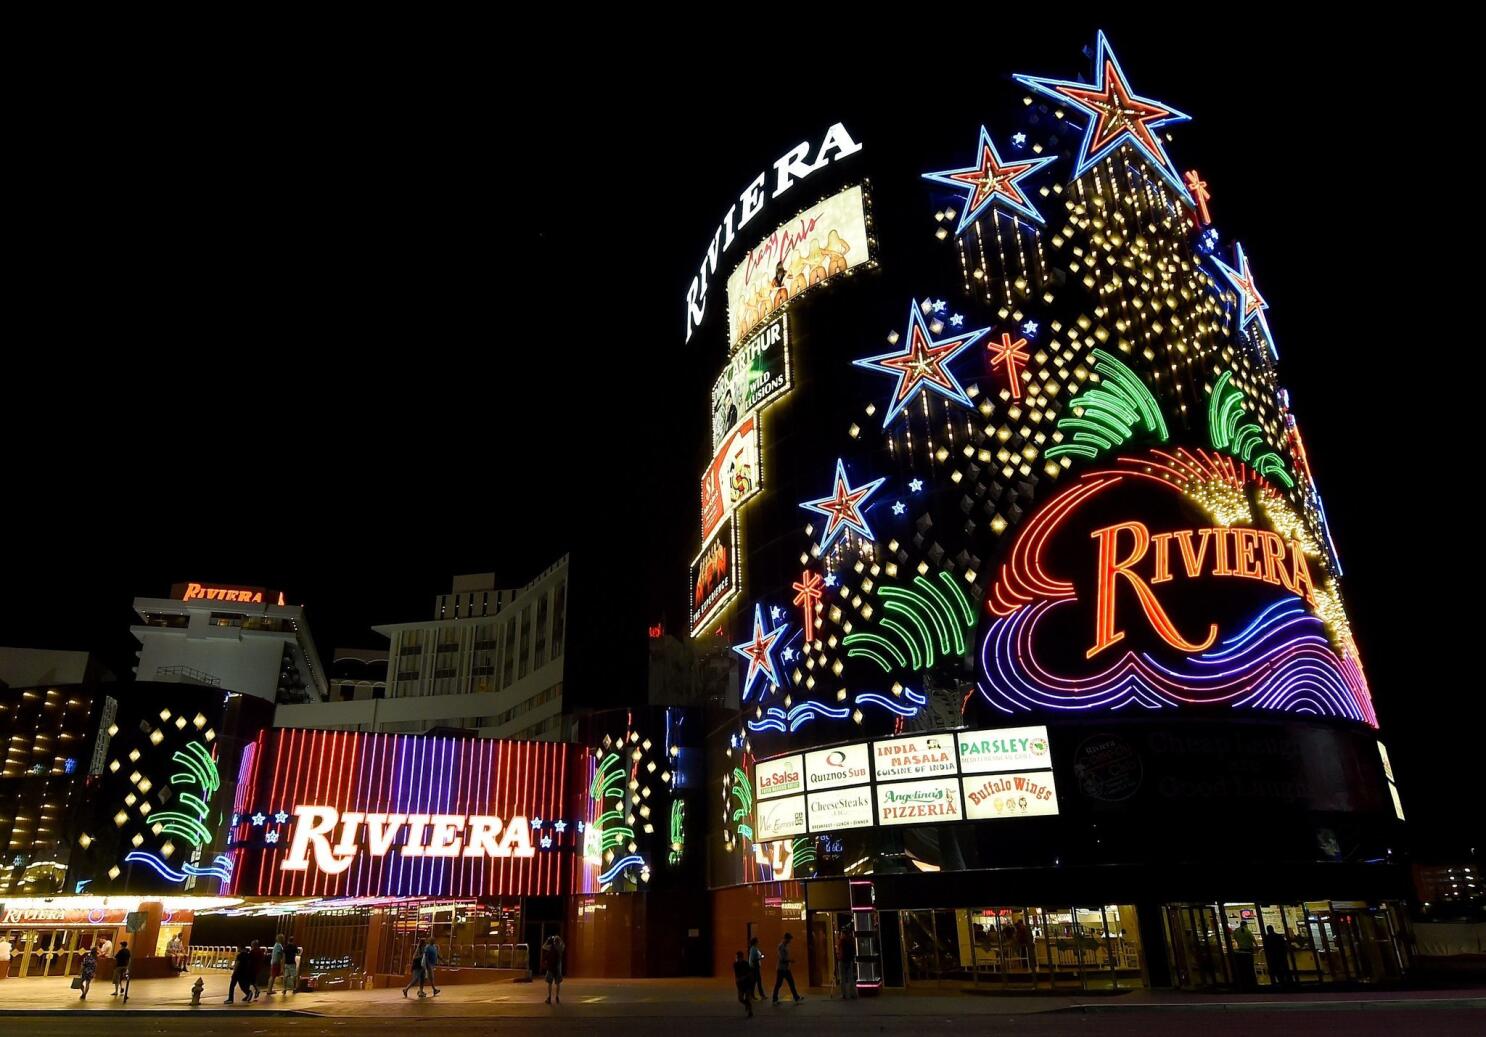 Las Vegas: Riviera is sold, may be imploded